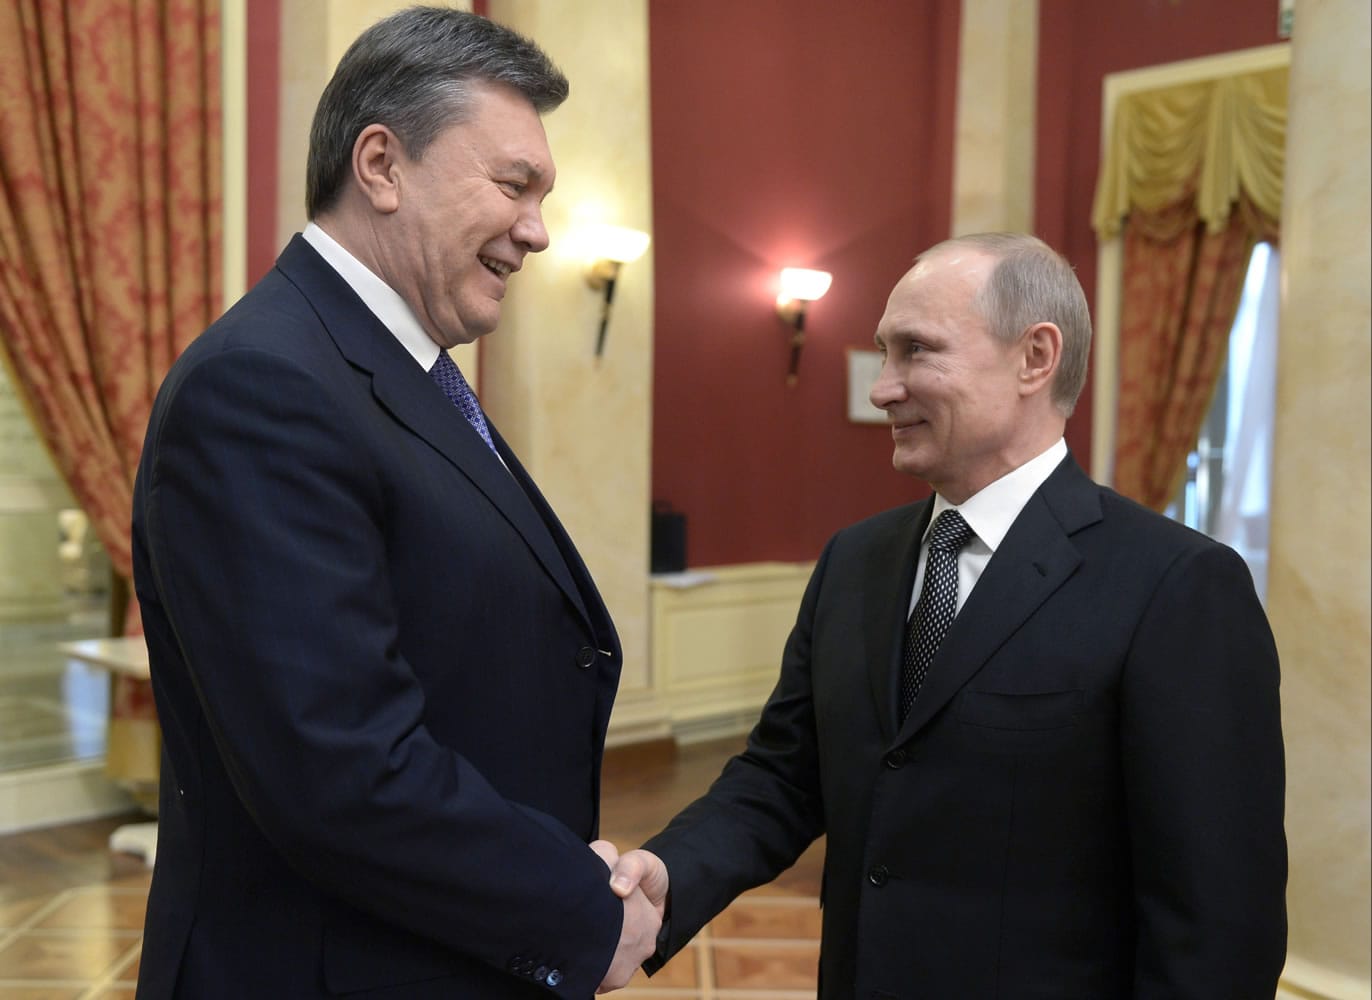 Russian President Vladimir Putin, right, shakes hands with Ukrainian President Viktor Yanukovych at the Olympic reception hosted by the Russian President in Sochi, Russia.